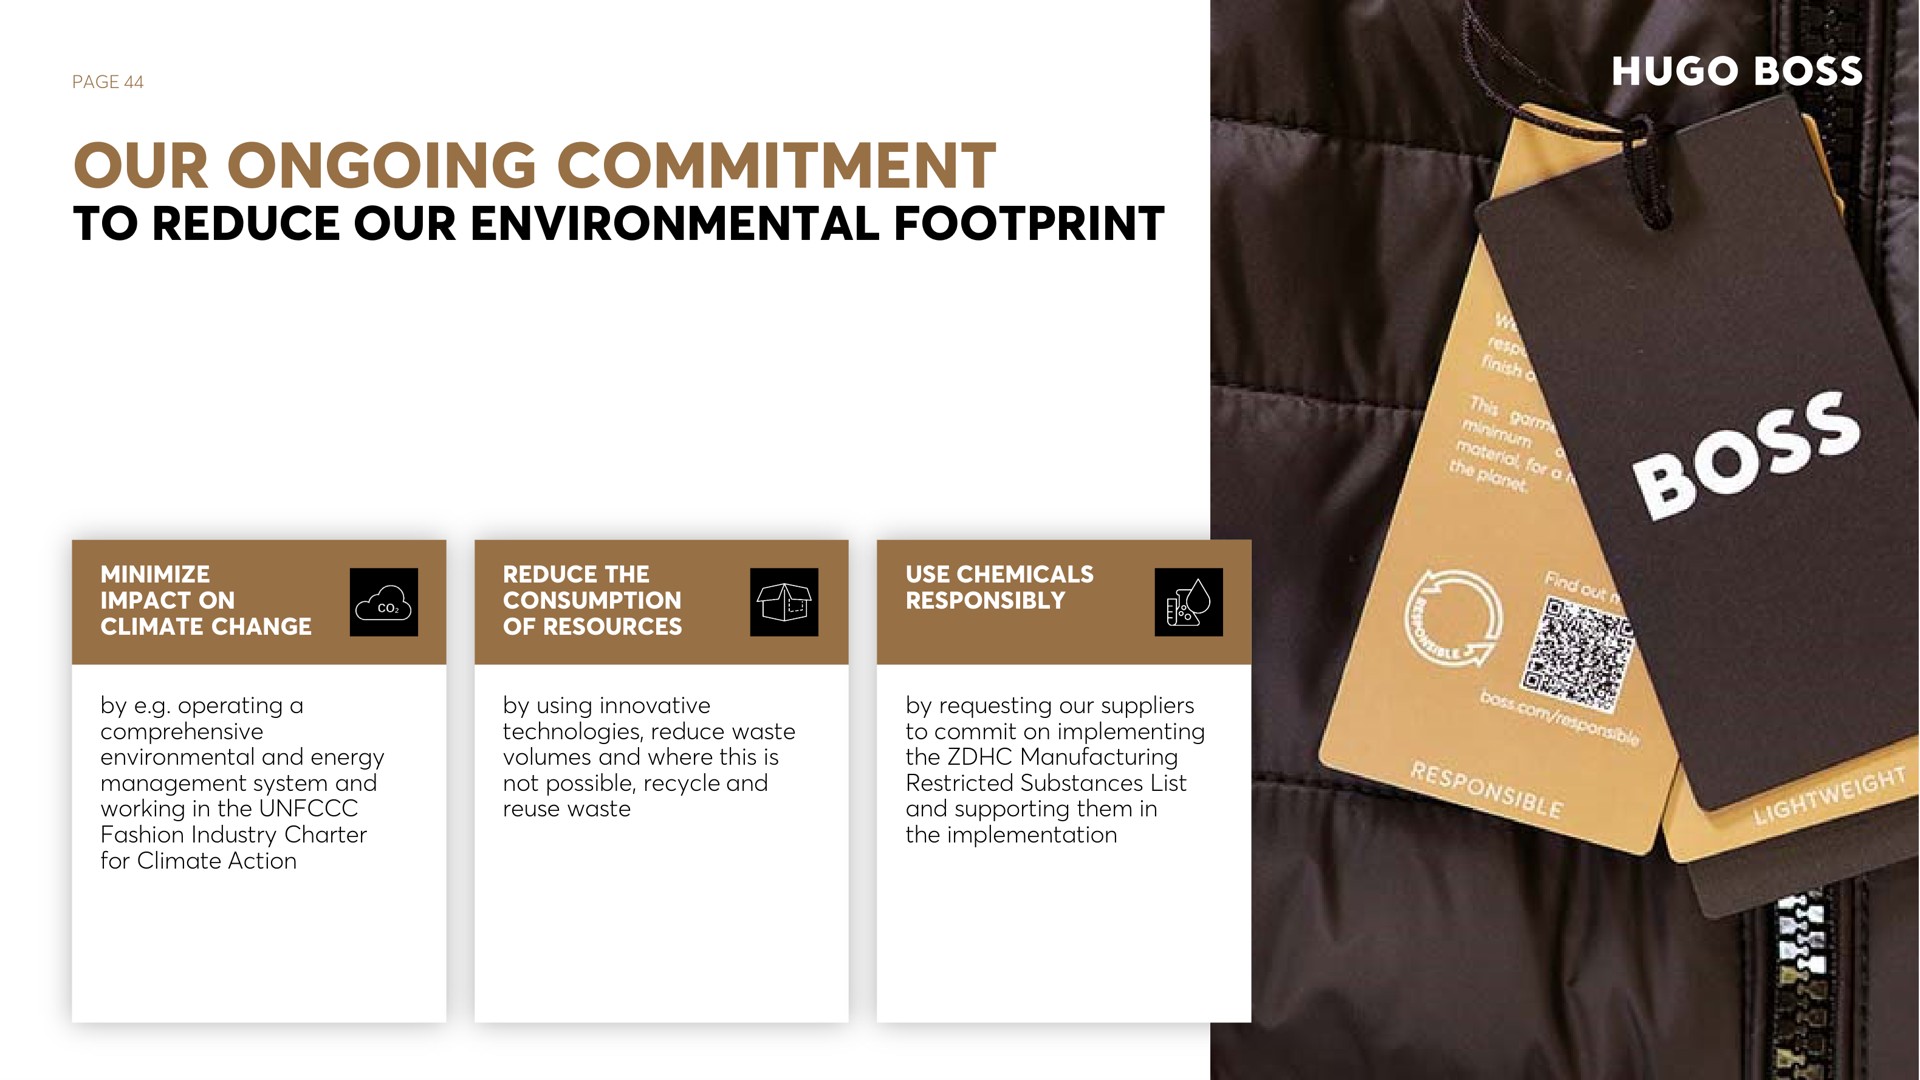 page our ongoing commitment to reduce our environmental footprint minimize impact on climate change reduce the consumption of resources use chemicals responsibly by operating a comprehensive environmental and energy management system and working in the fashion industry charter for climate action by using innovative technologies reduce waste volumes and where this is not possible recycle and reuse waste by requesting our suppliers to commit on implementing the manufacturing restricted substances list and supporting them in the implementation rare ale coe | Hugo Boss